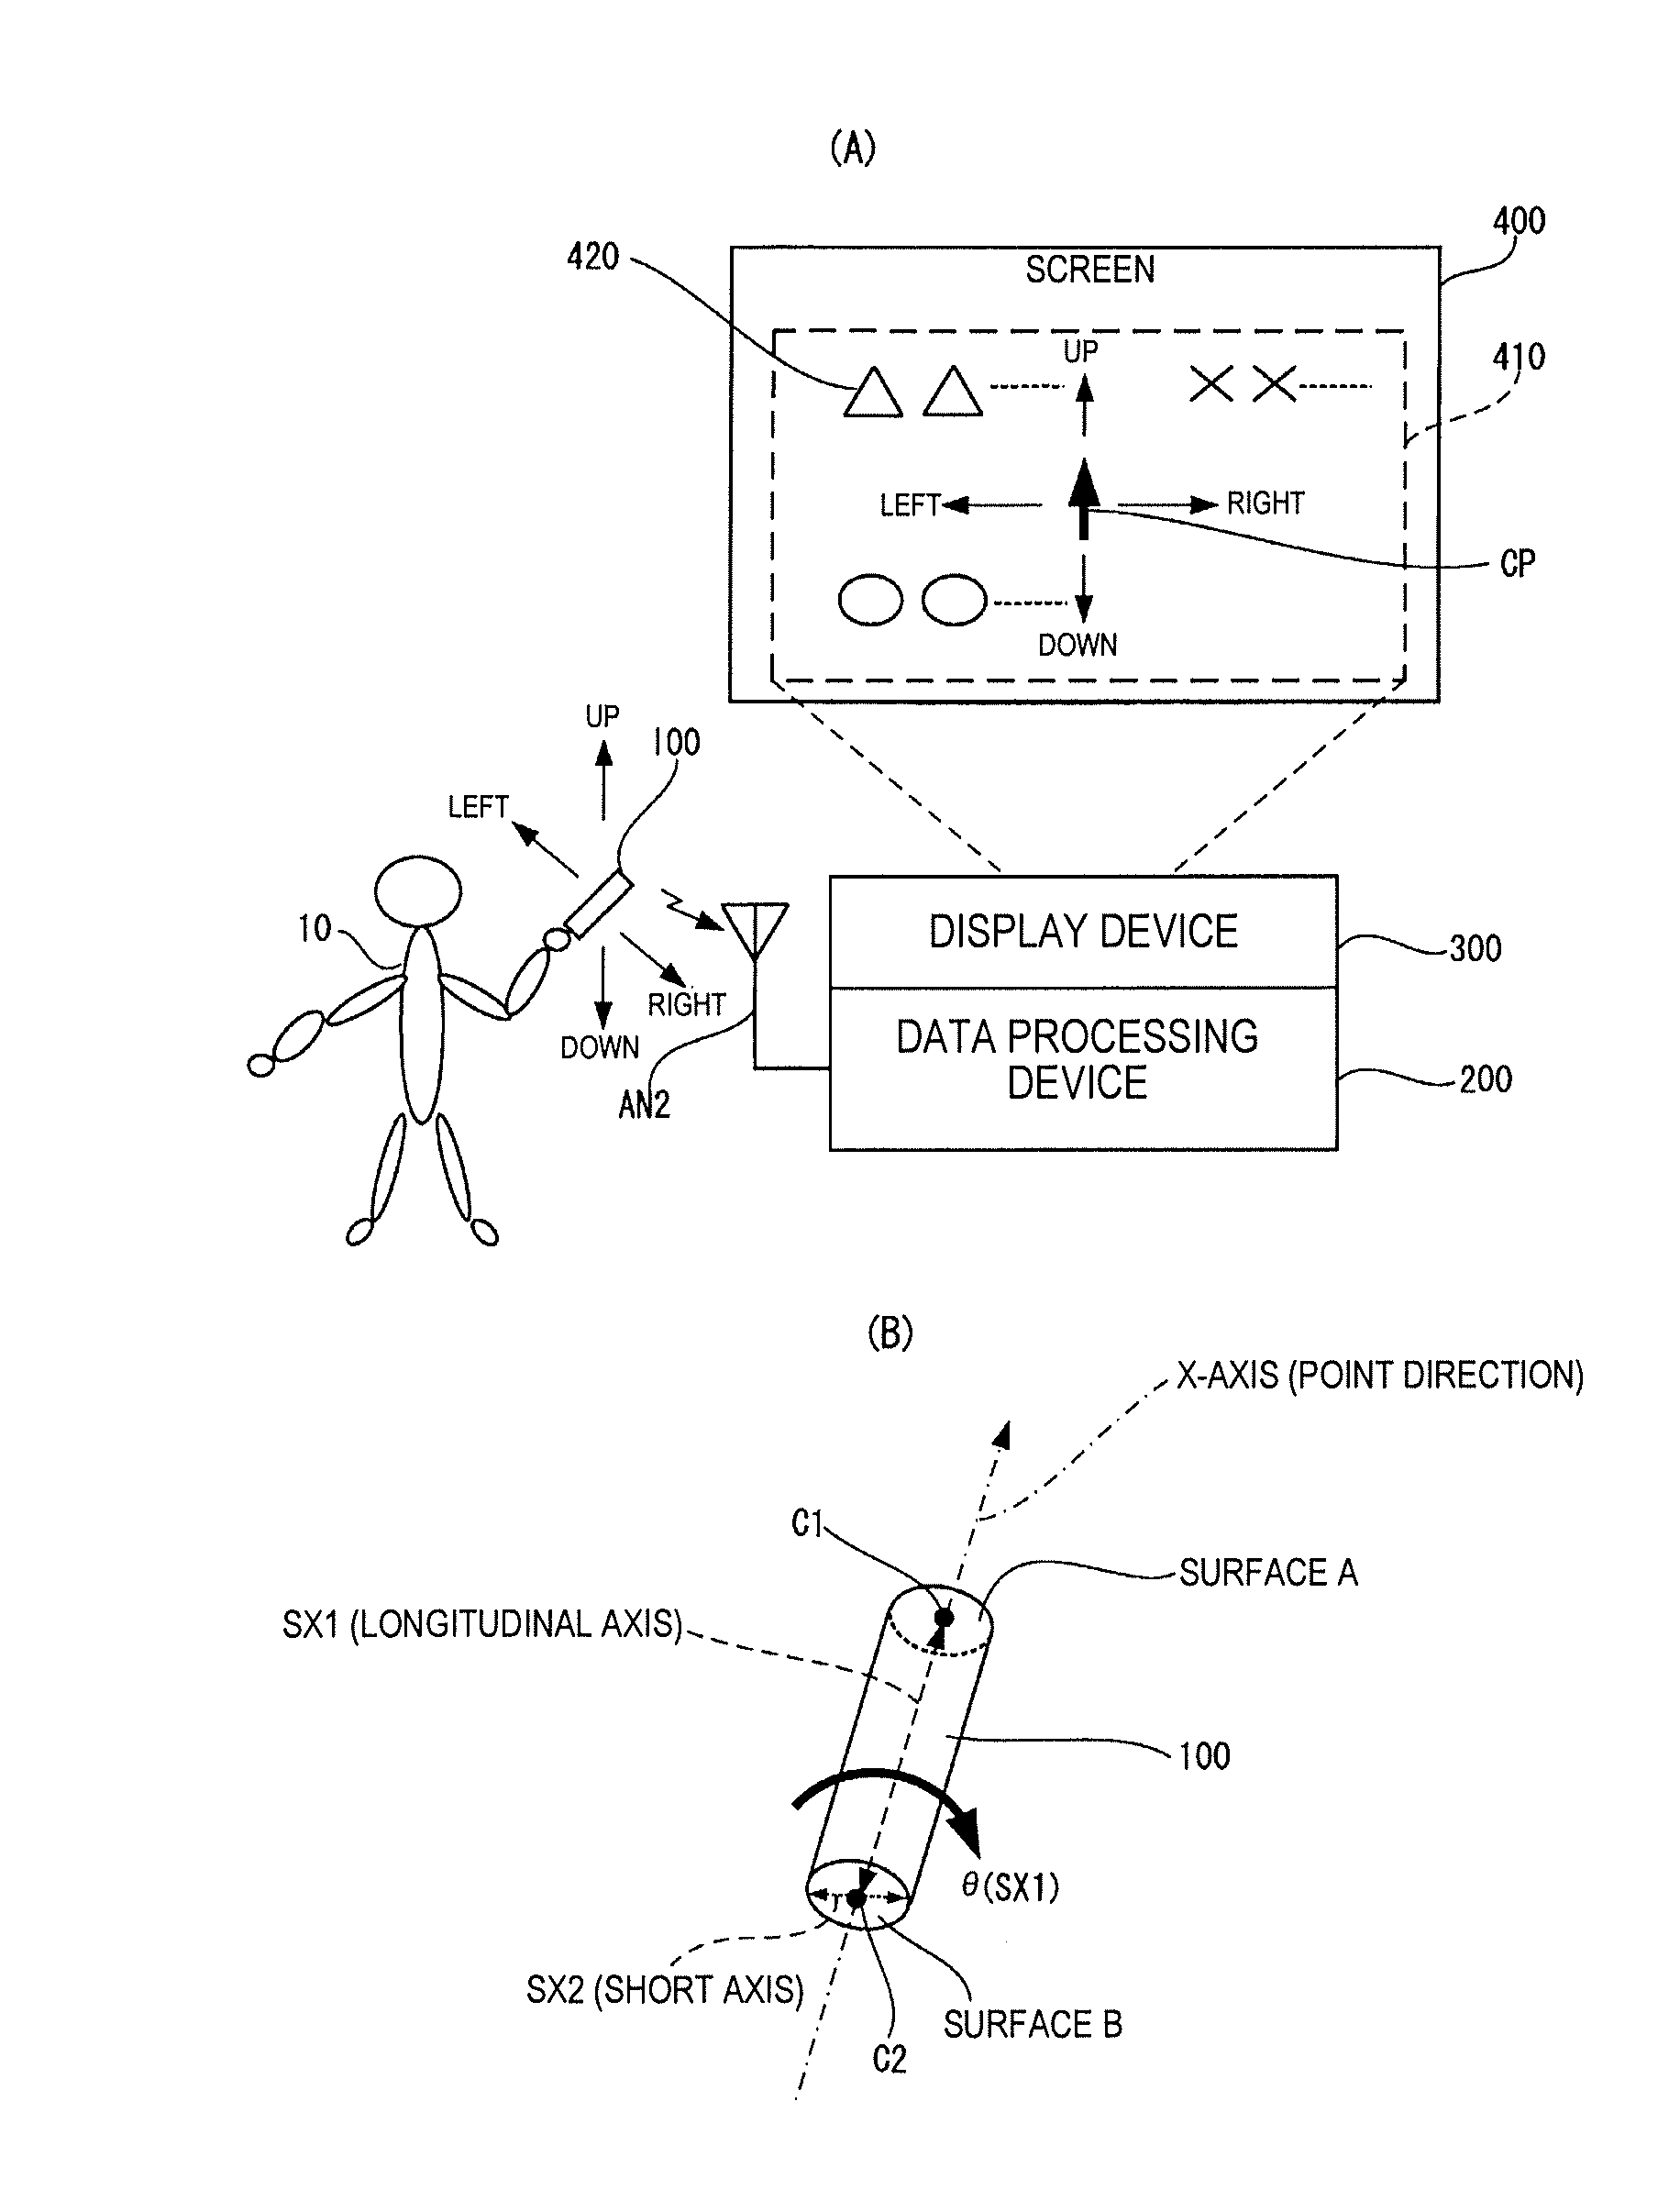 Input device and data processing system